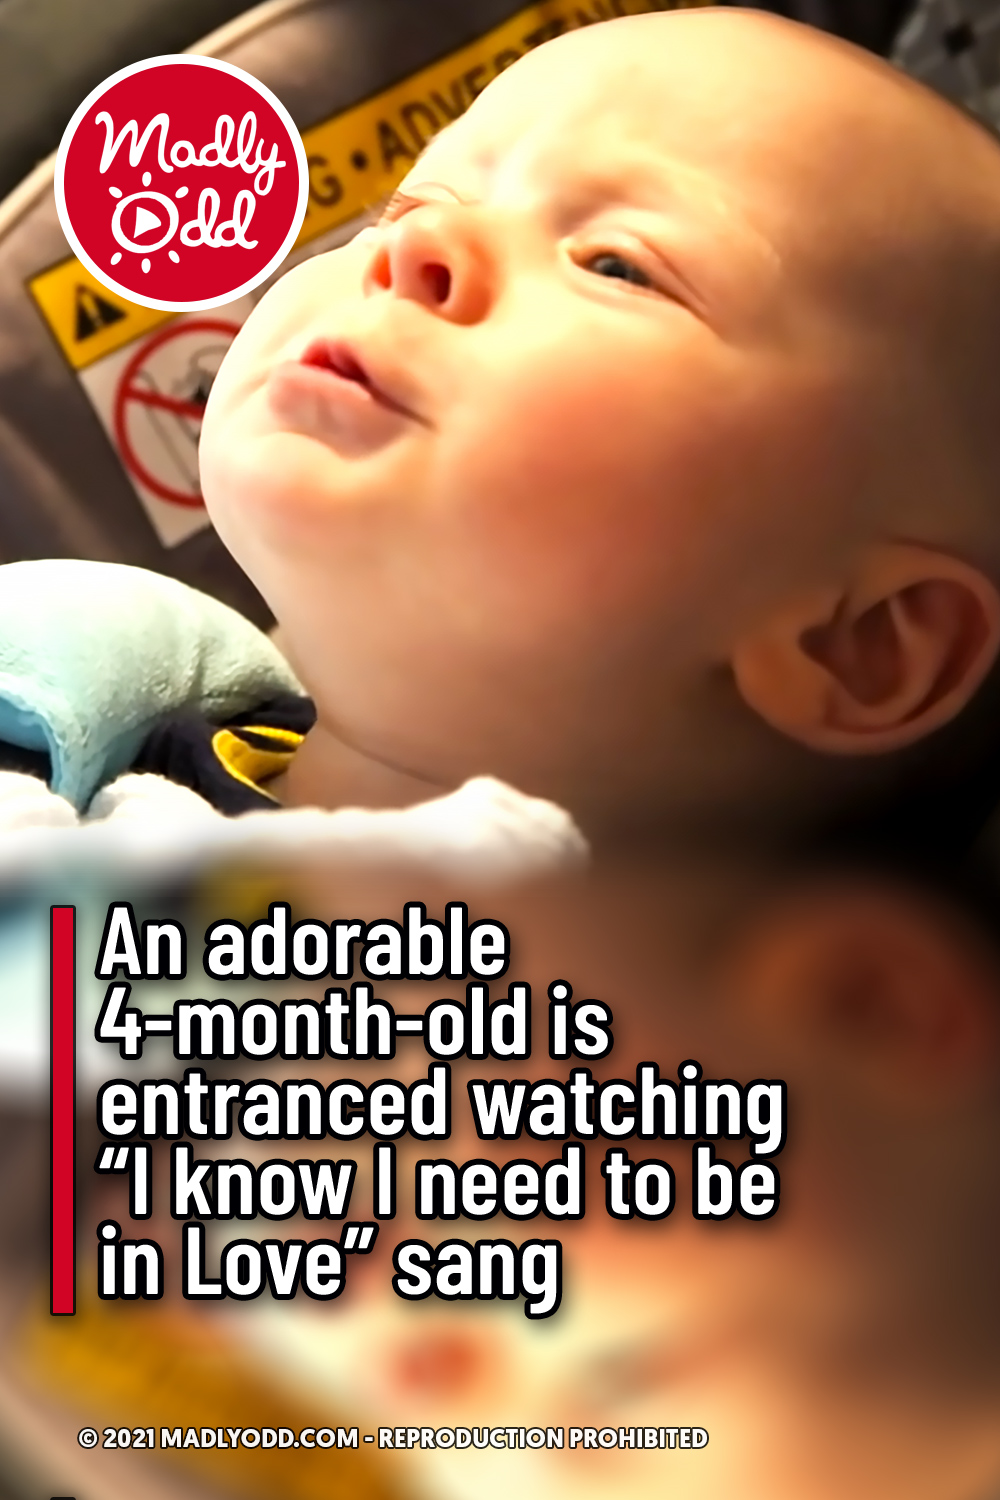 An adorable 4-month-old is entranced watching “I know I need to be in Love” sang